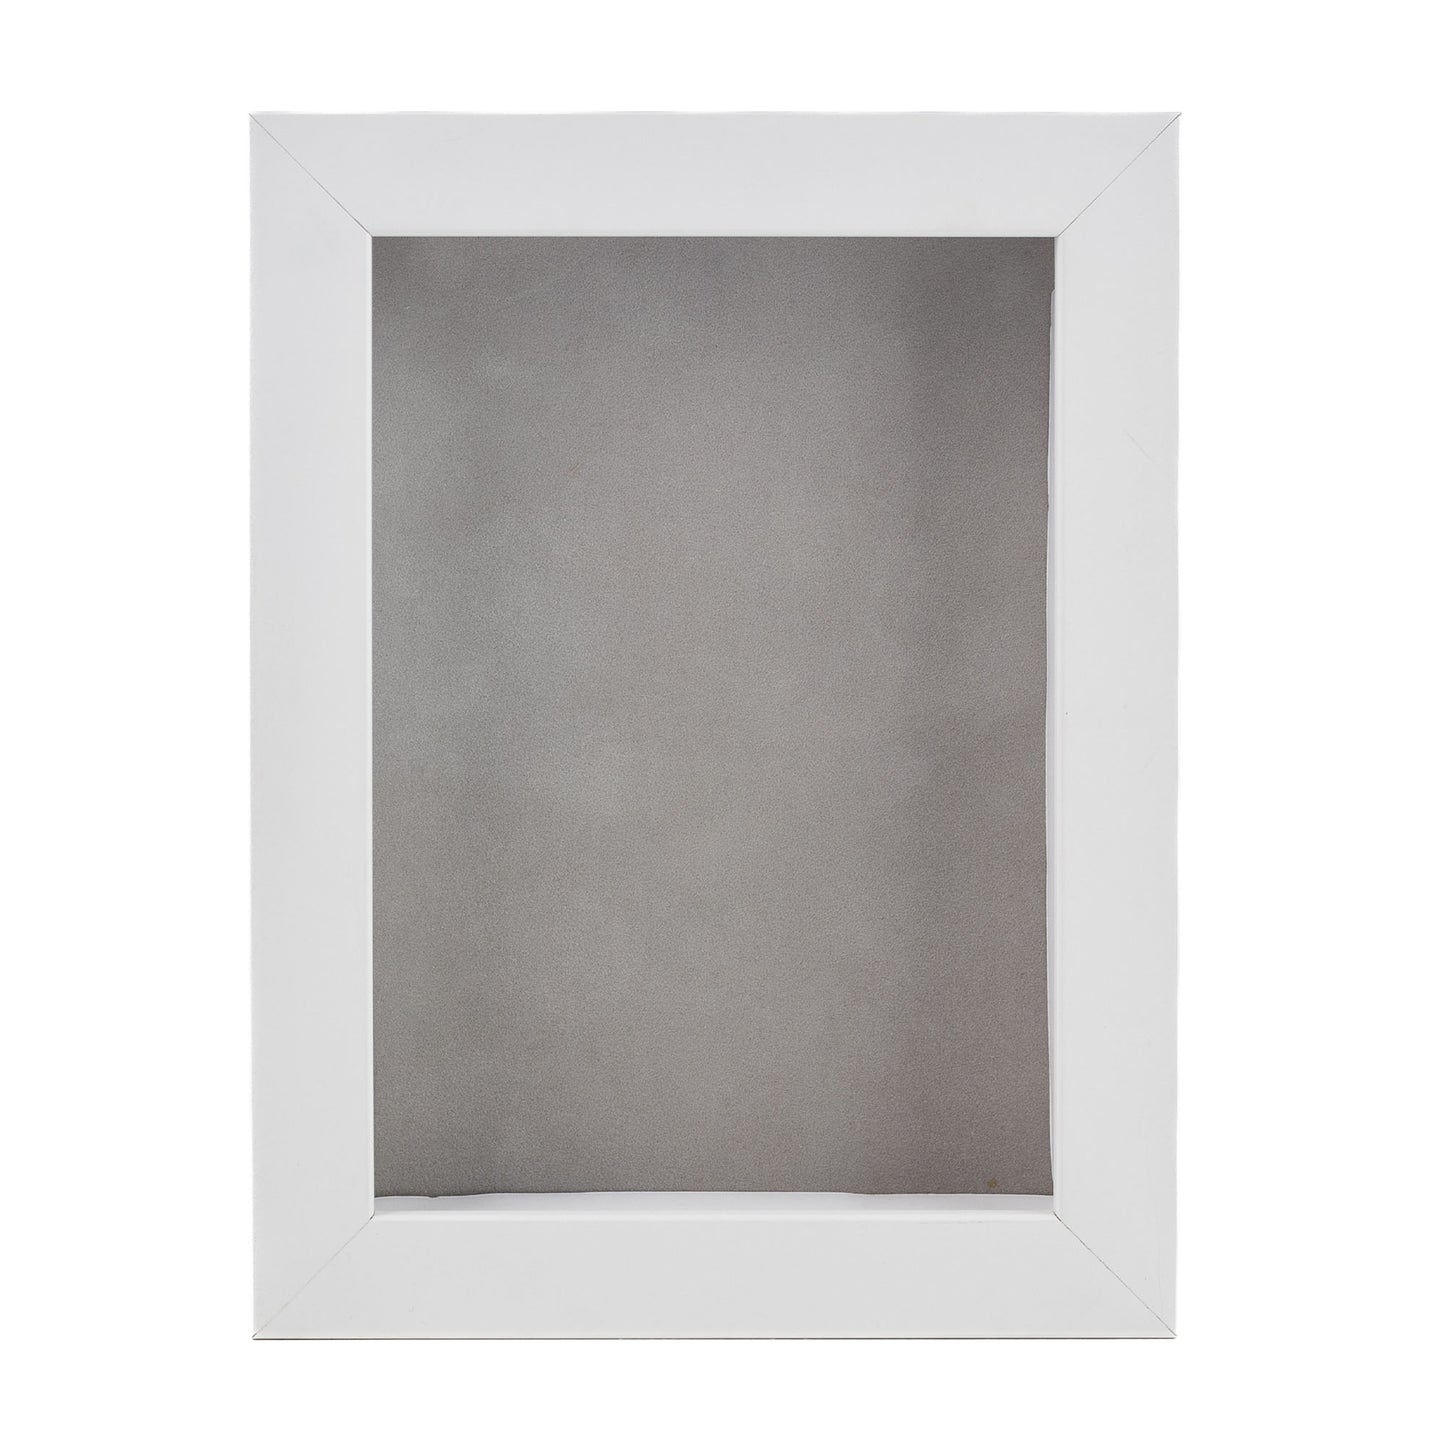 White Shadow Box Frame With Light Grey Acid-Free Suede Backing